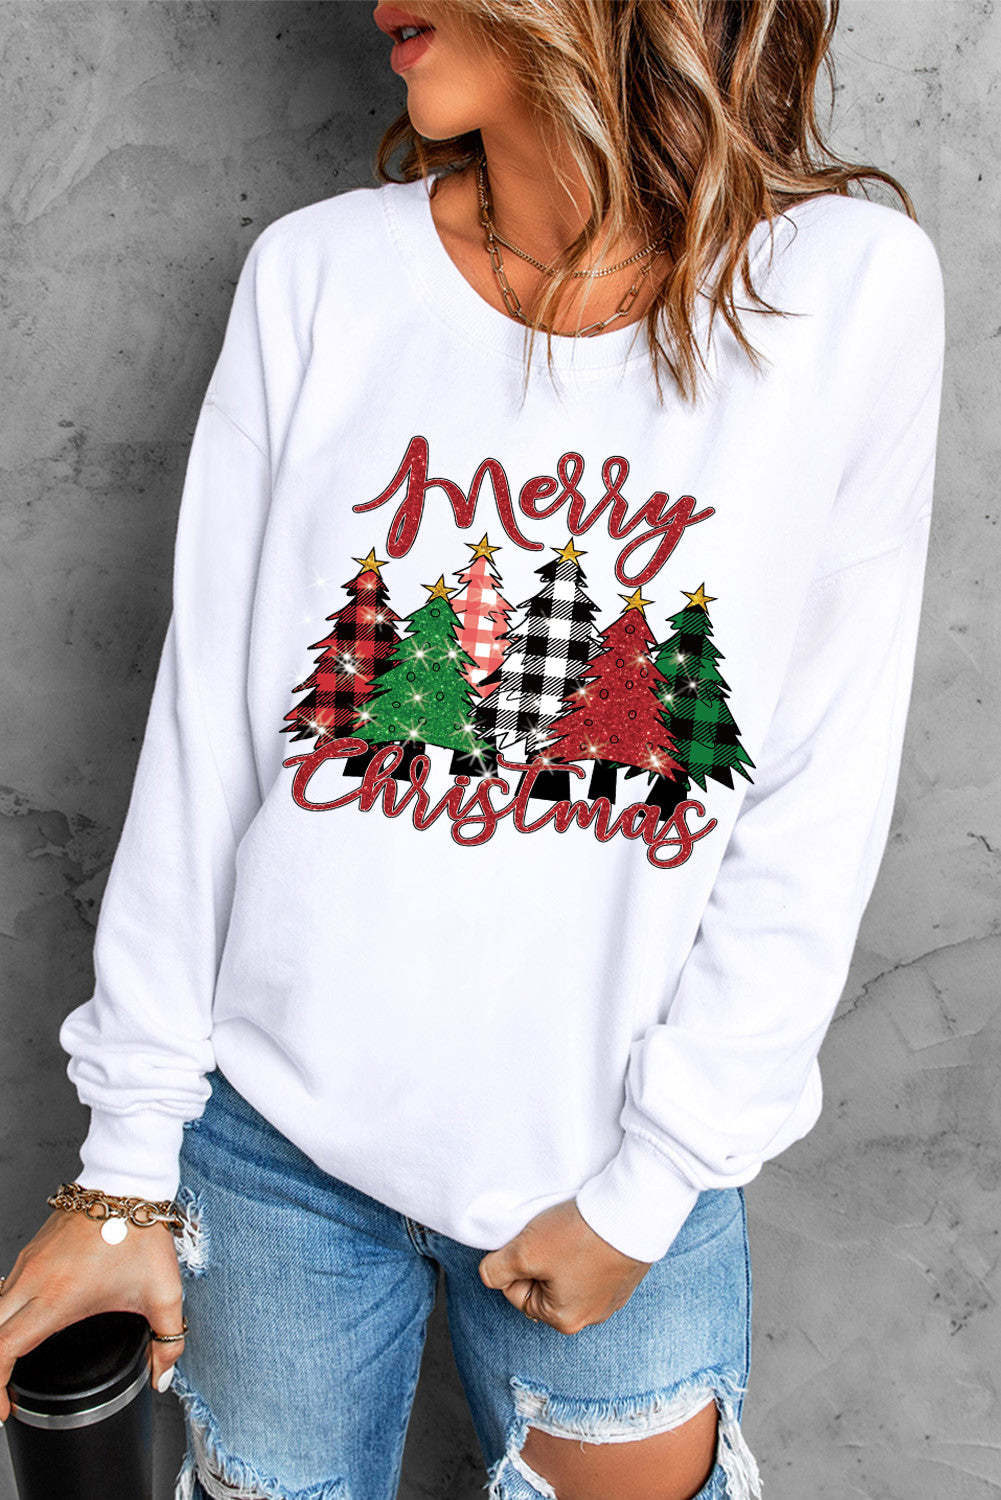 Christmas Solid Round Neck Shift Casual pullover sweatshirt $ 29.99 ...